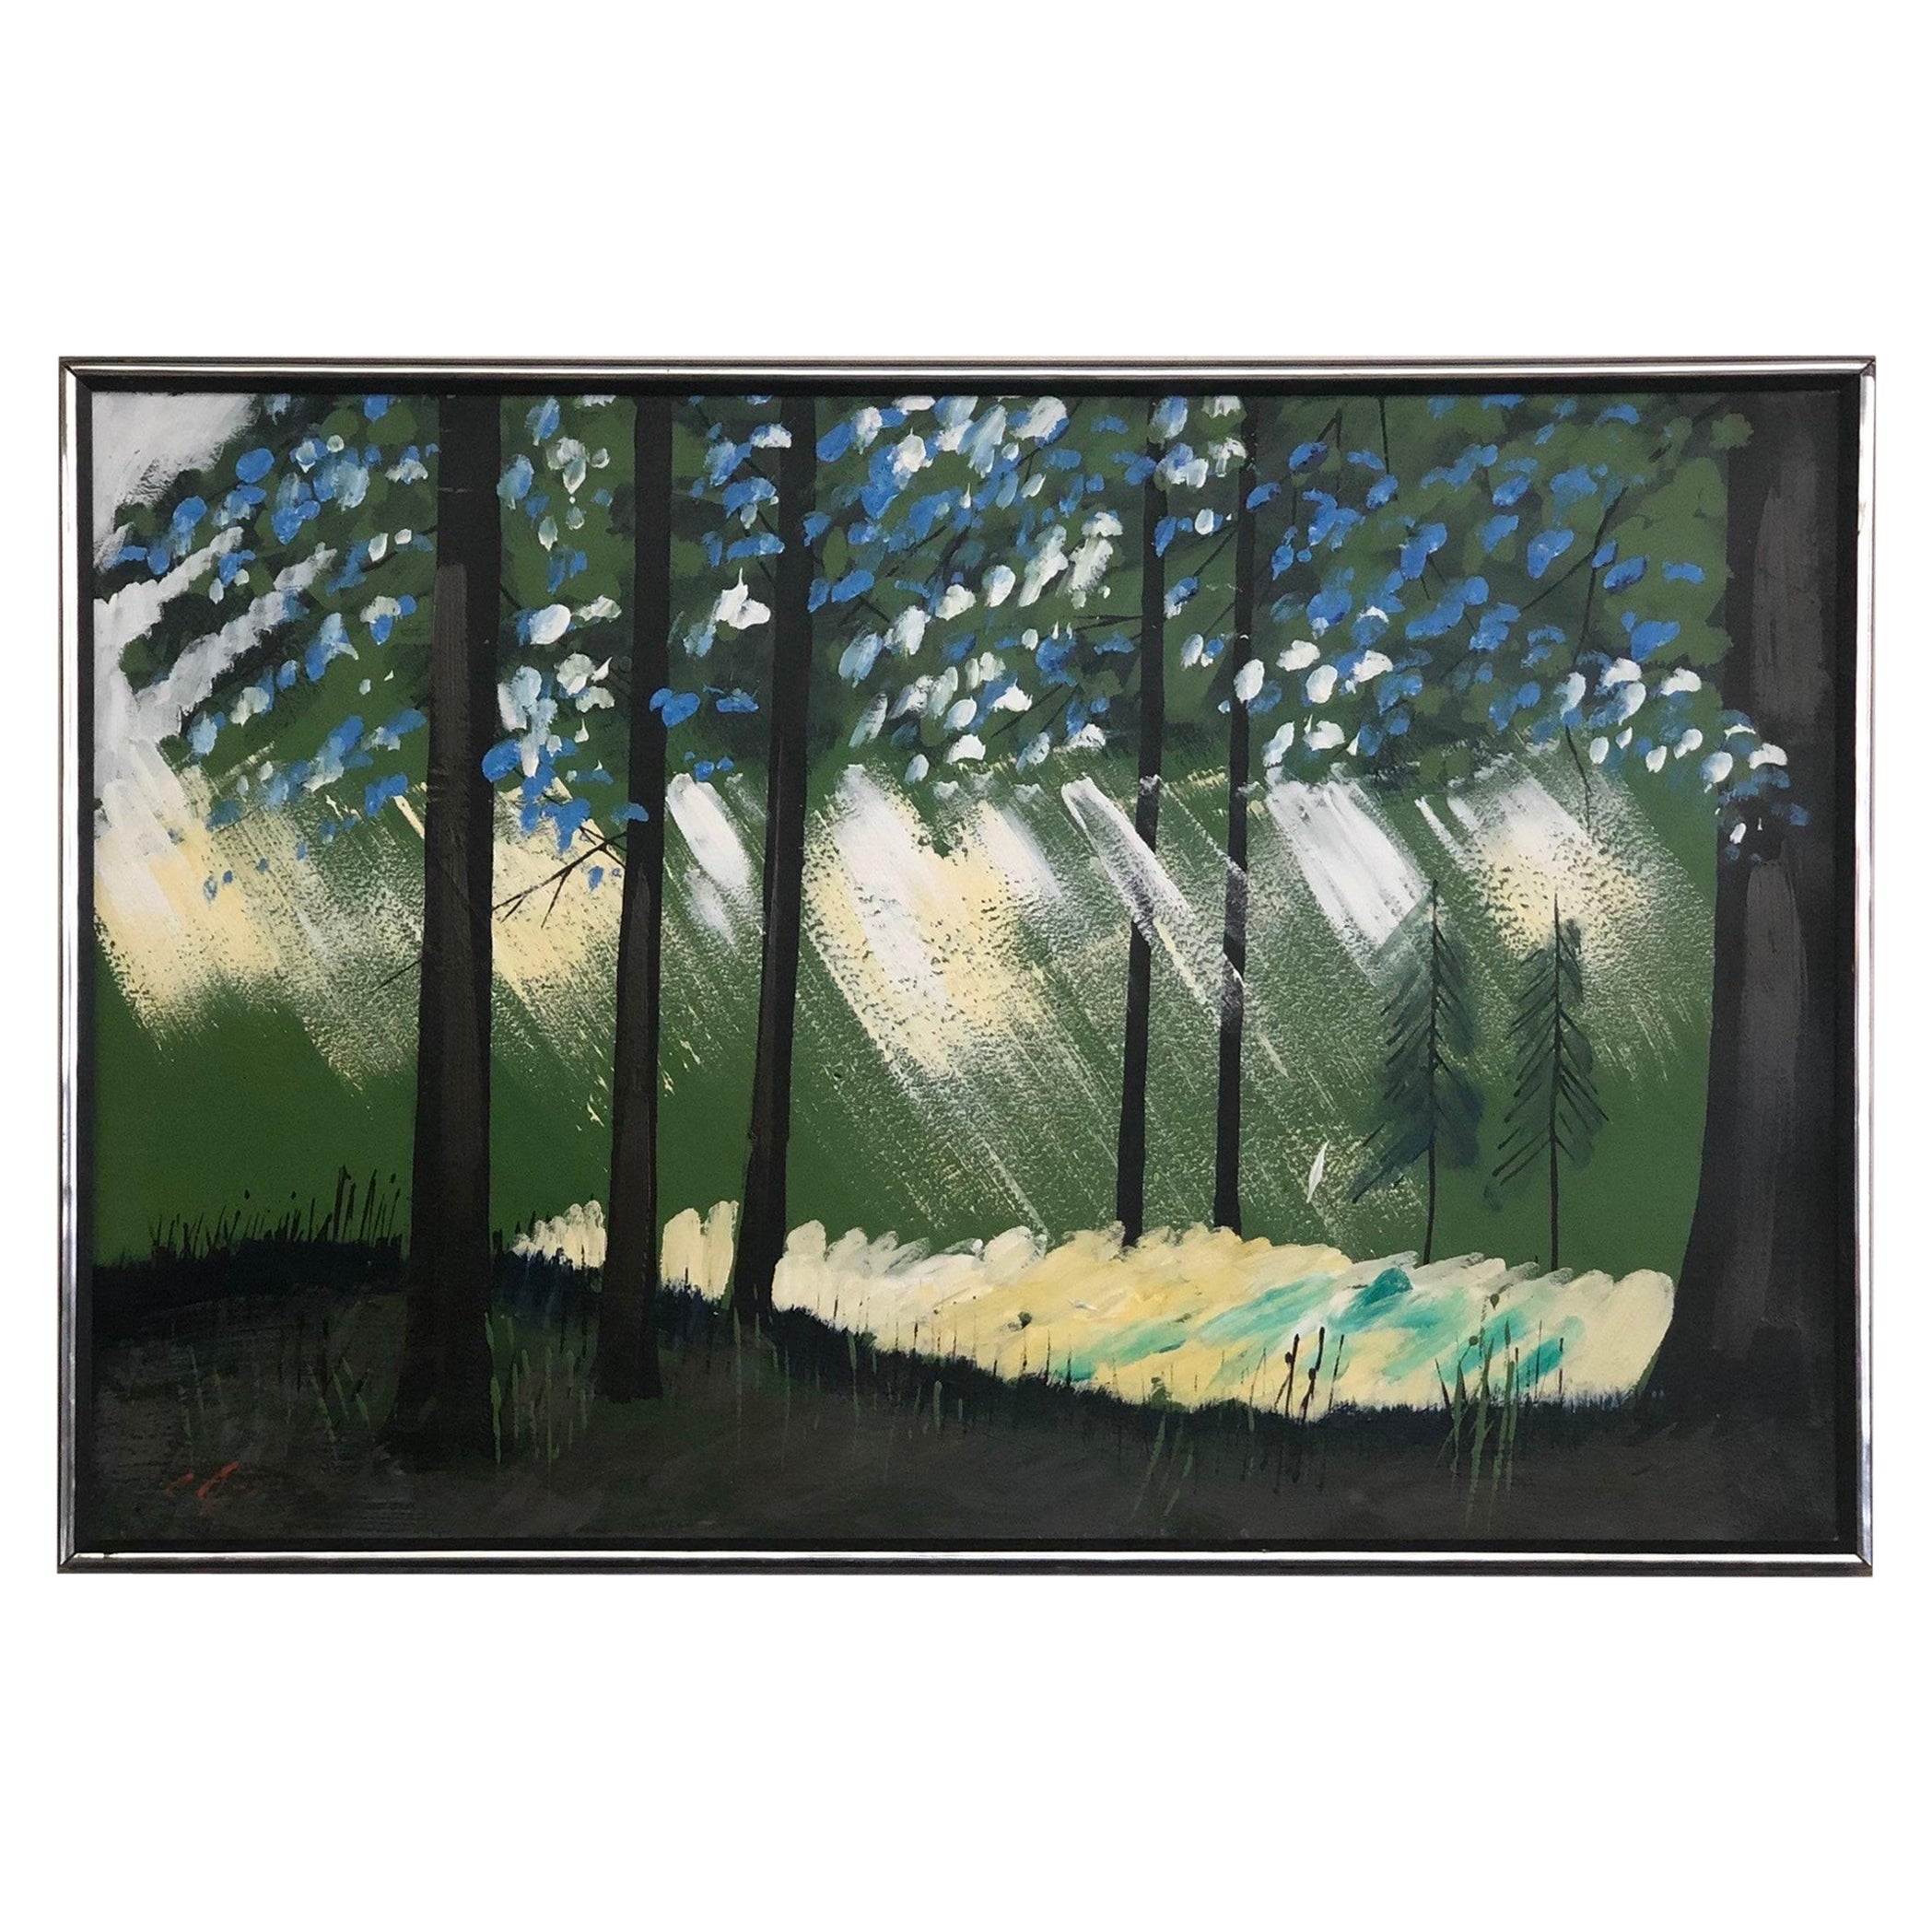 Vintage Mcm Mid-Century Modern Signed Framed Forest Original Painting Abstract